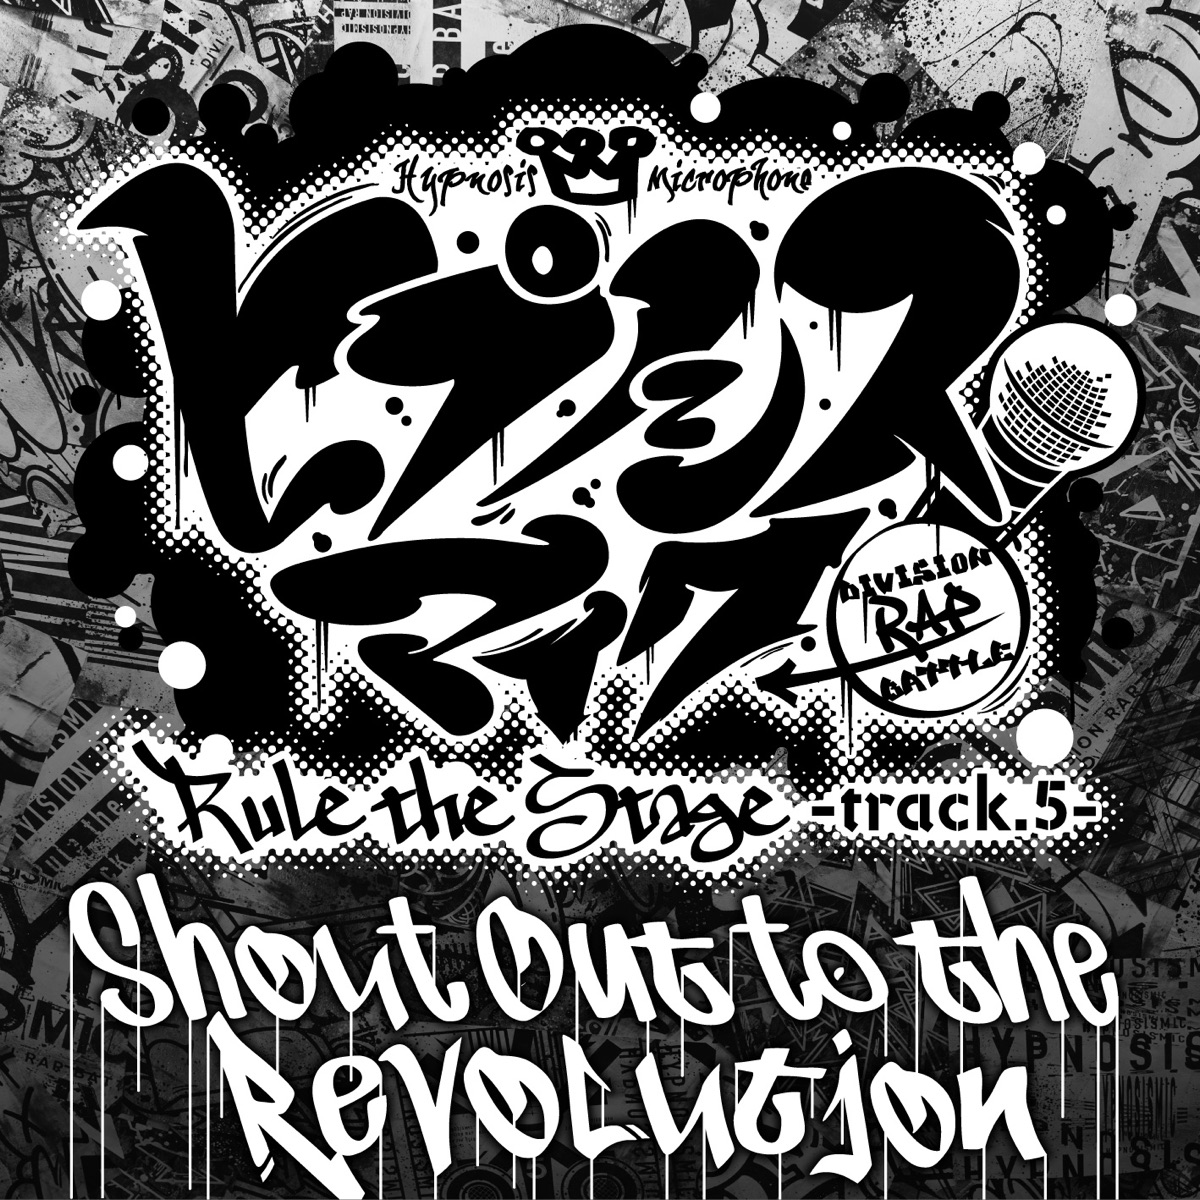 Cover for『Hypnosis Mic -Division Rap Battle- Rule the Stage (Track.5 All Cast) - Shout Out to the Revolution -Rule the Stage track.5-』from the release『Shout Out to the Revolution -Rule the Stage track.5-』